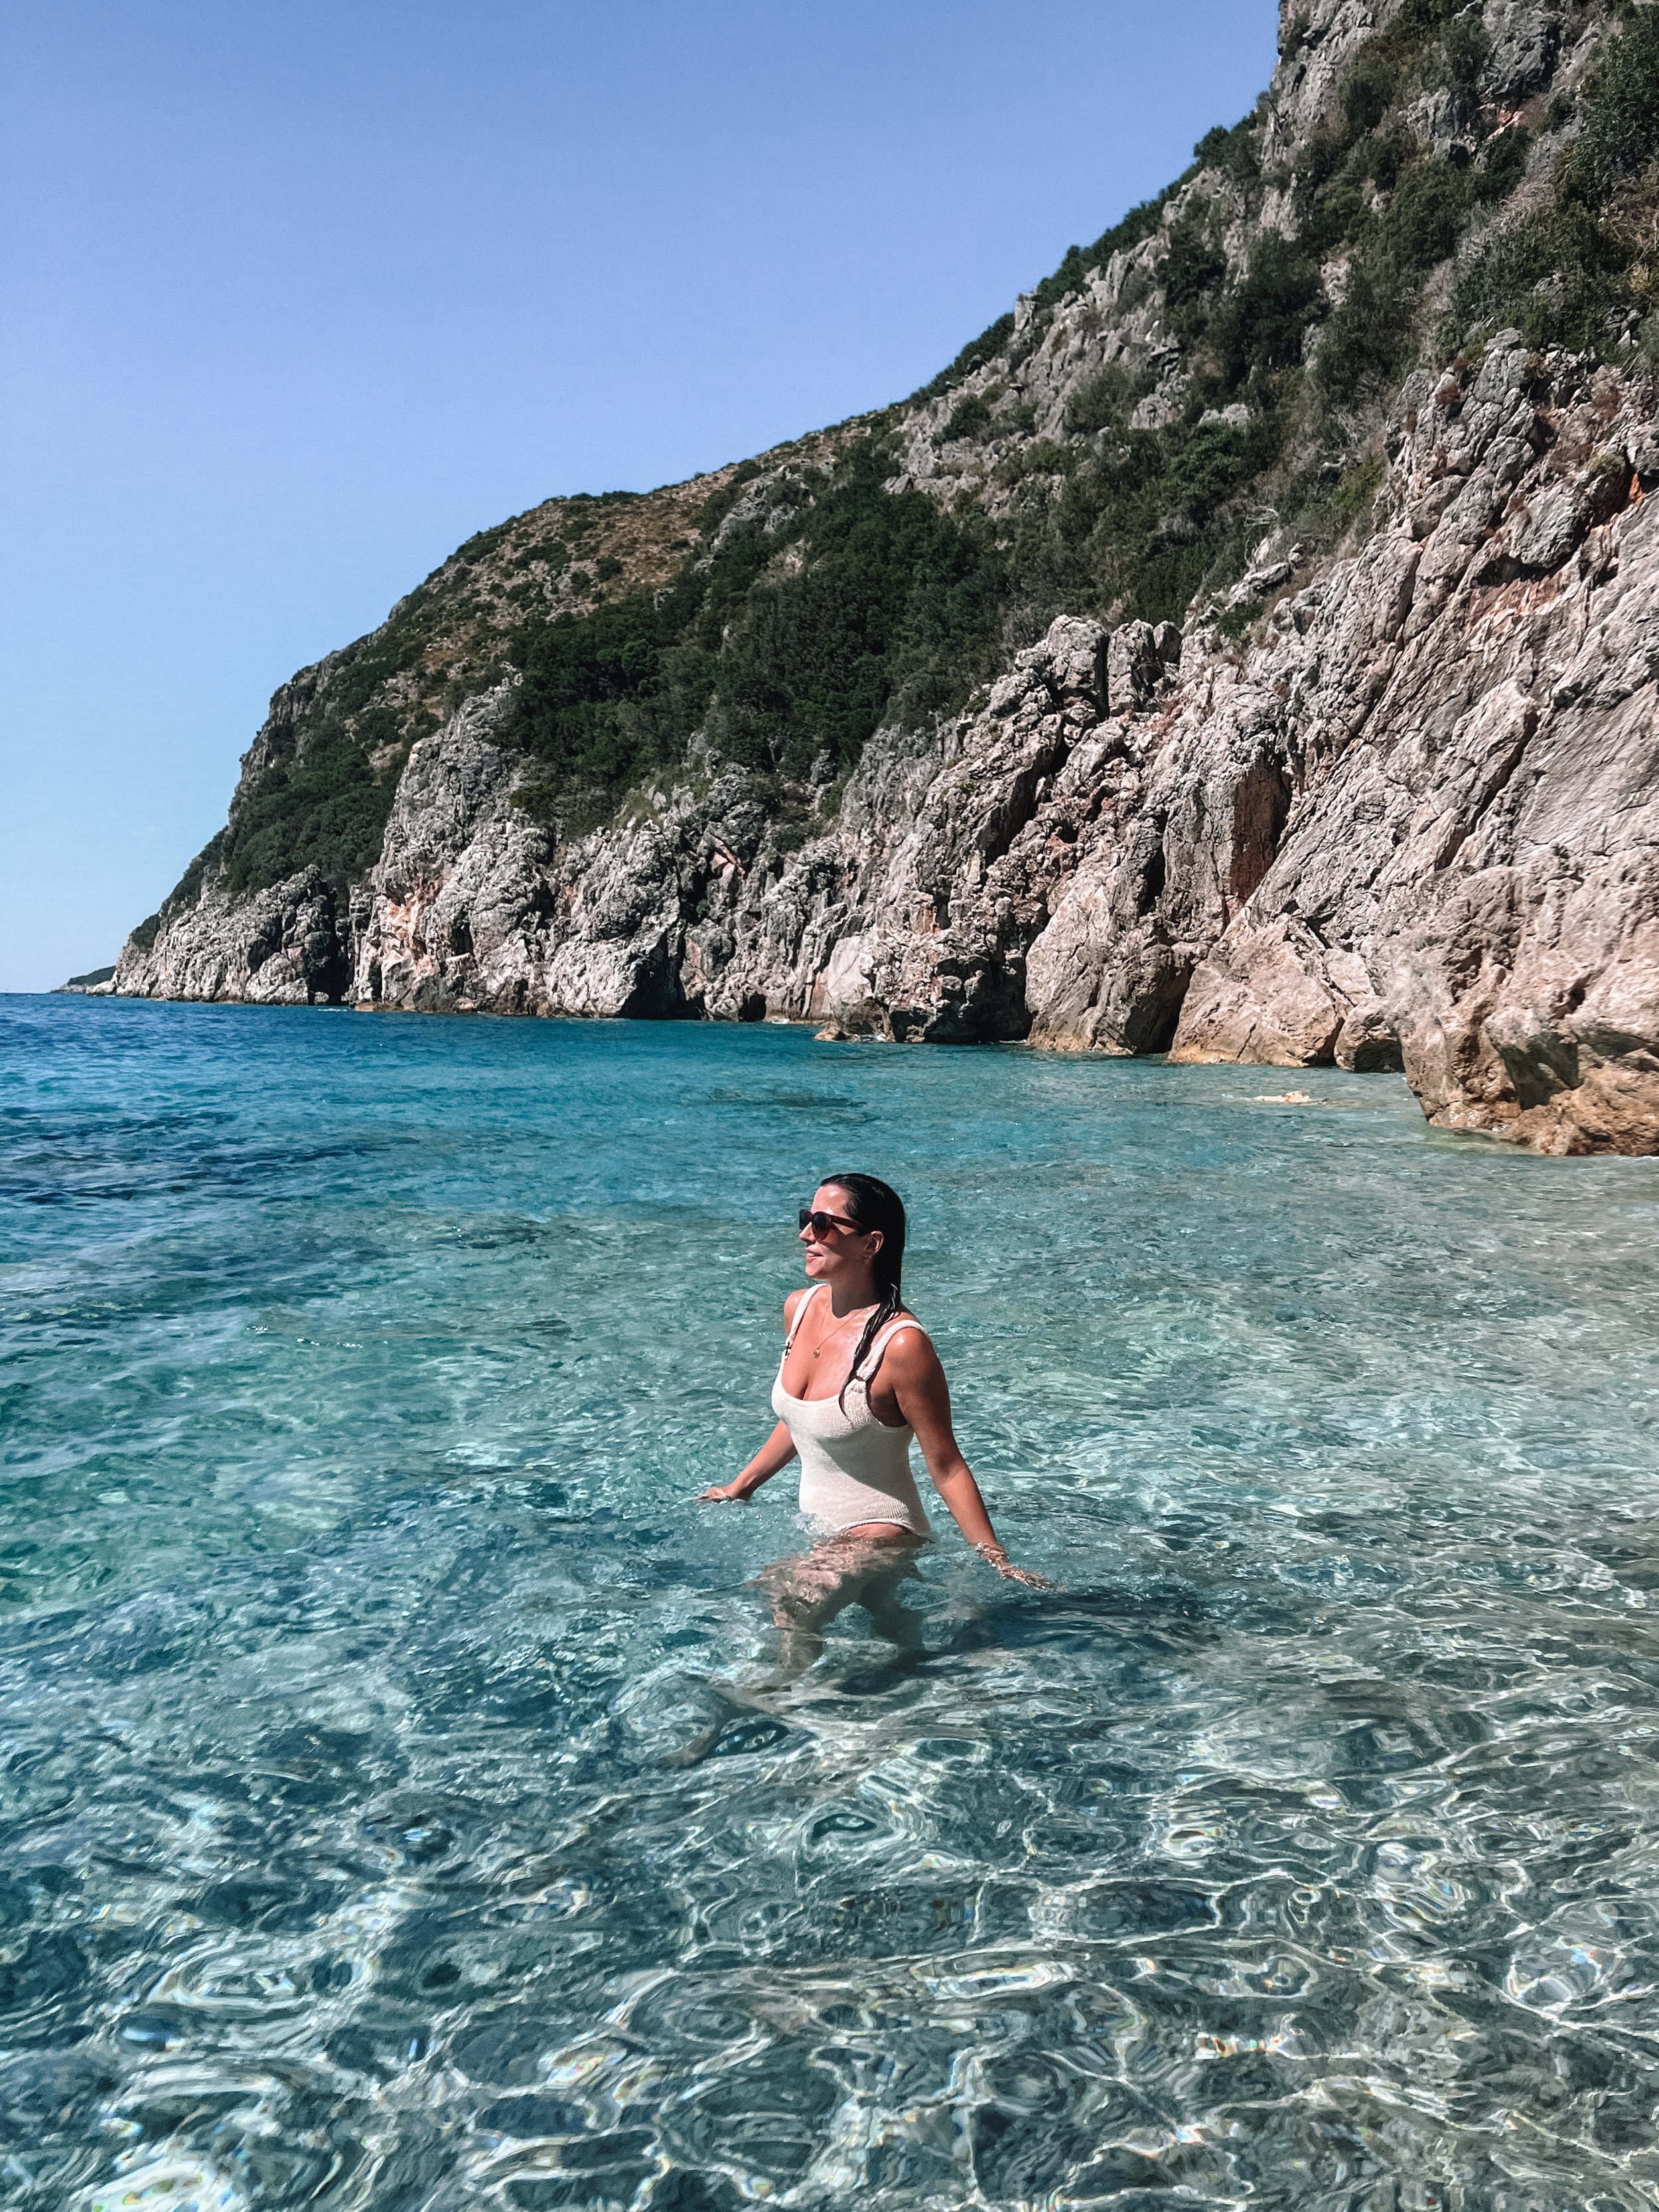 The Best Beaches & Where to Swim on the Albanian Riviera